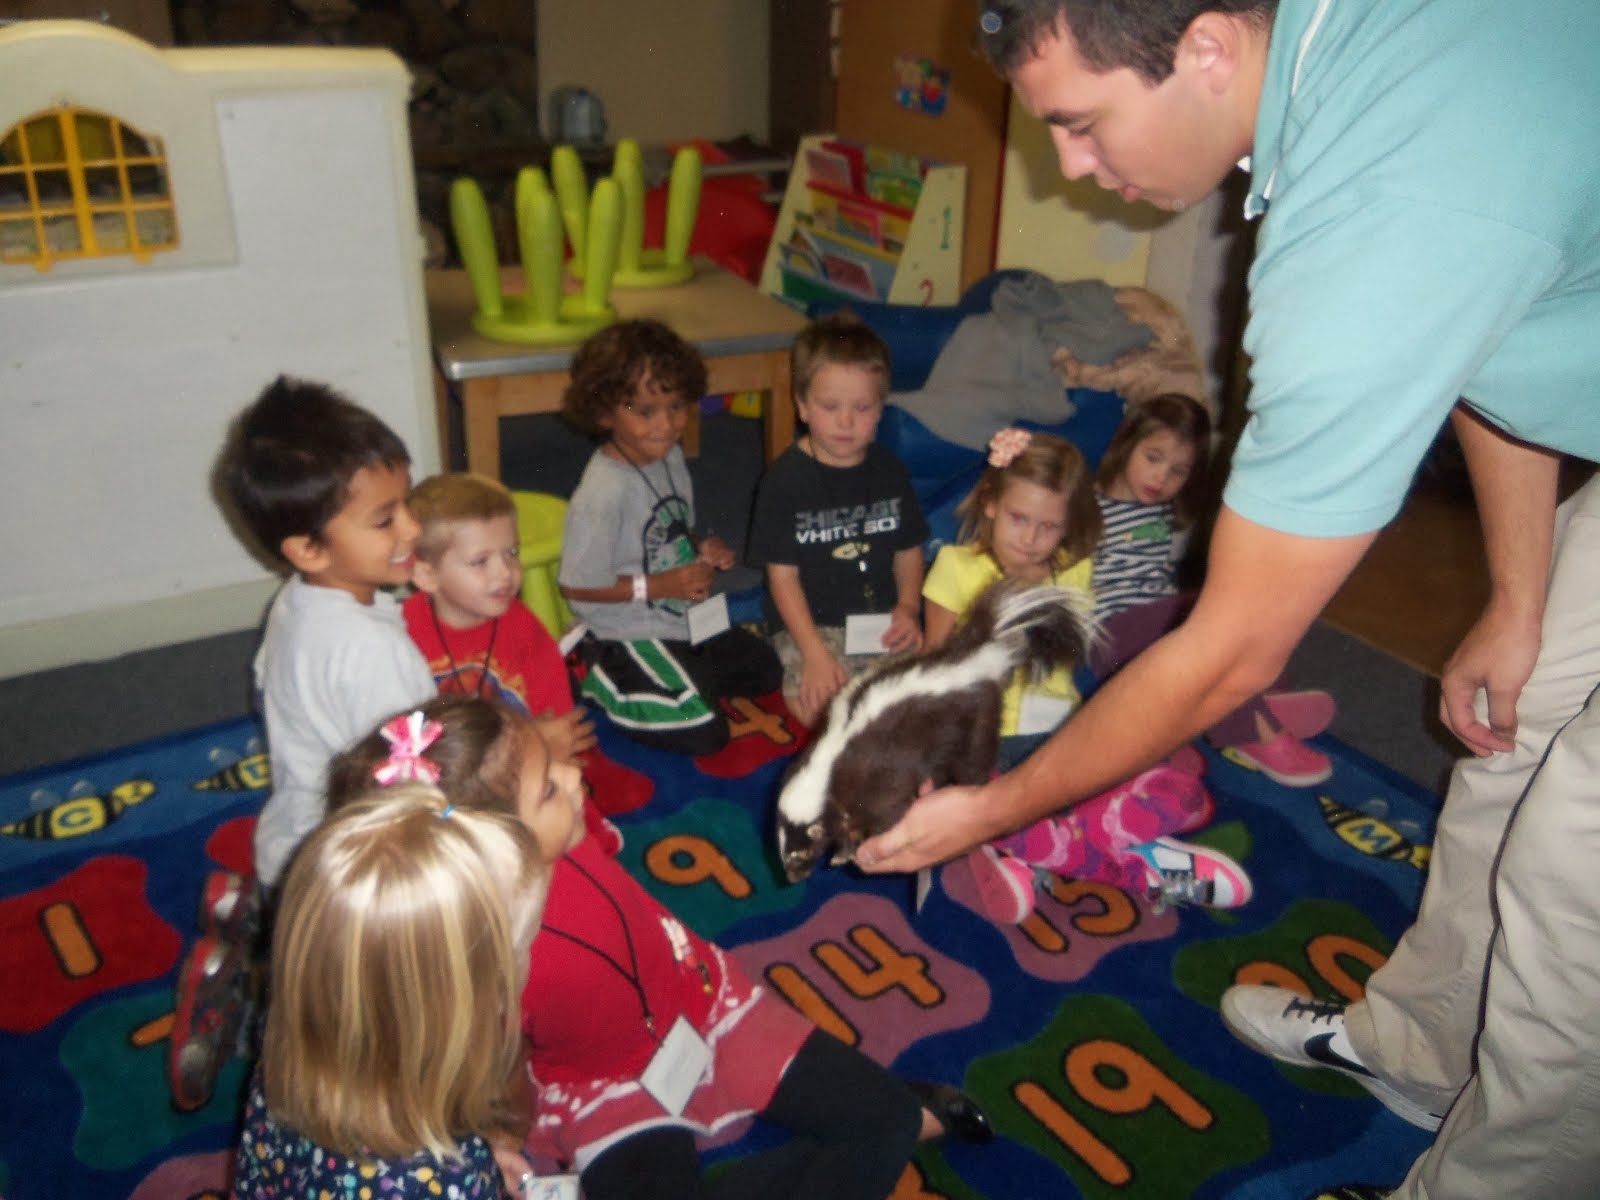 Josh from BYU came and taught us about some special animals.